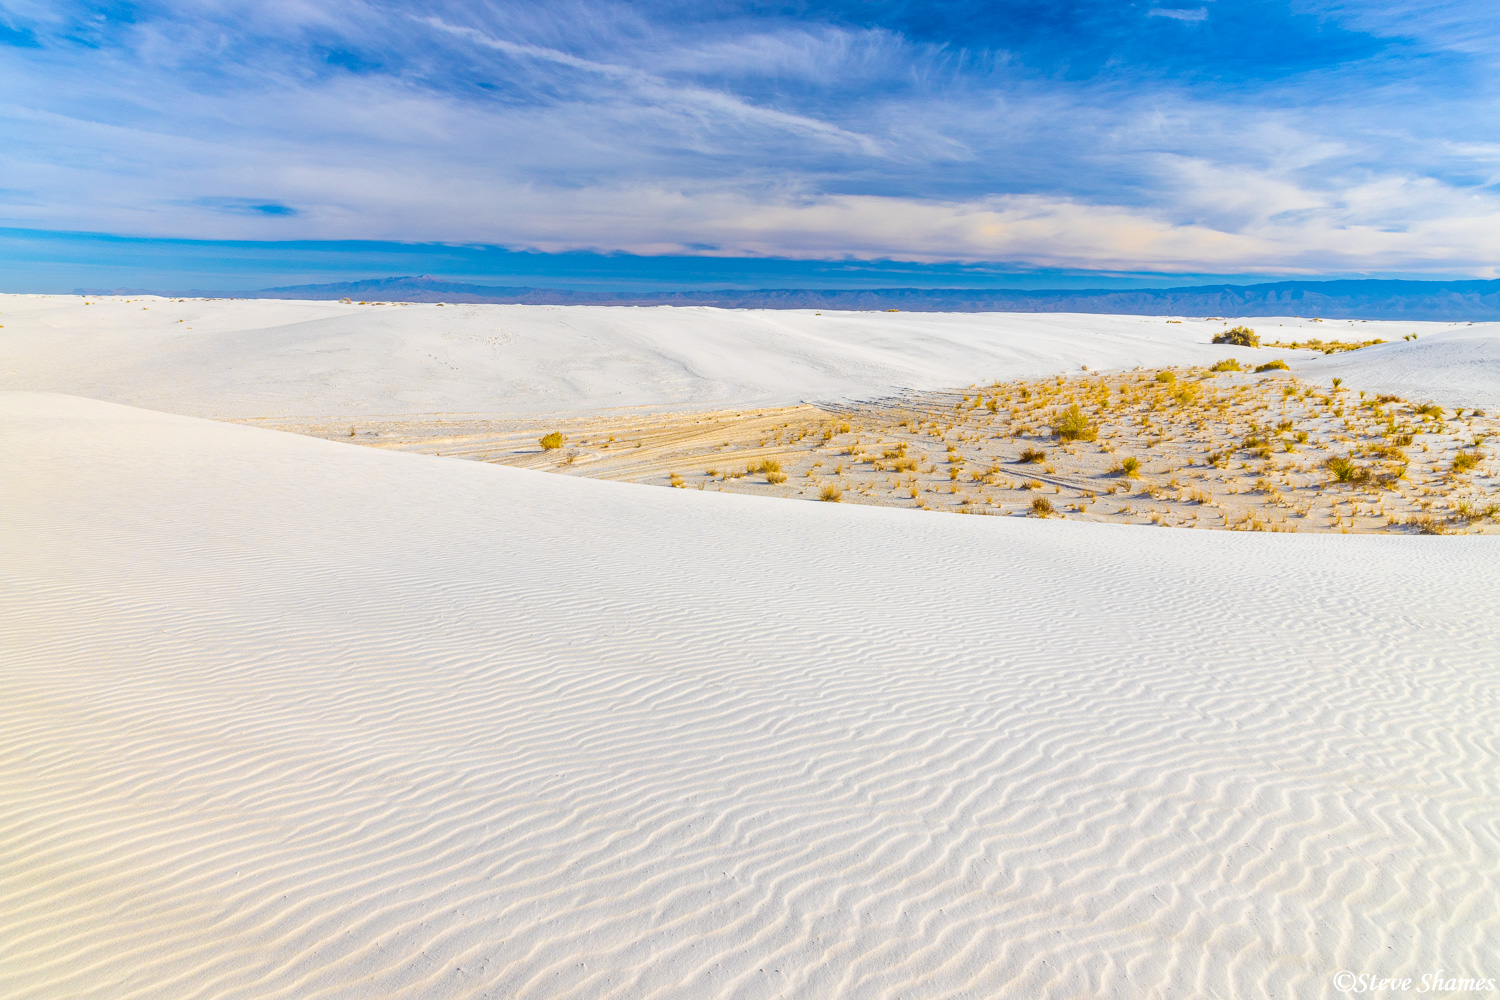 The rippled pristine sands of White Sands National Monument.